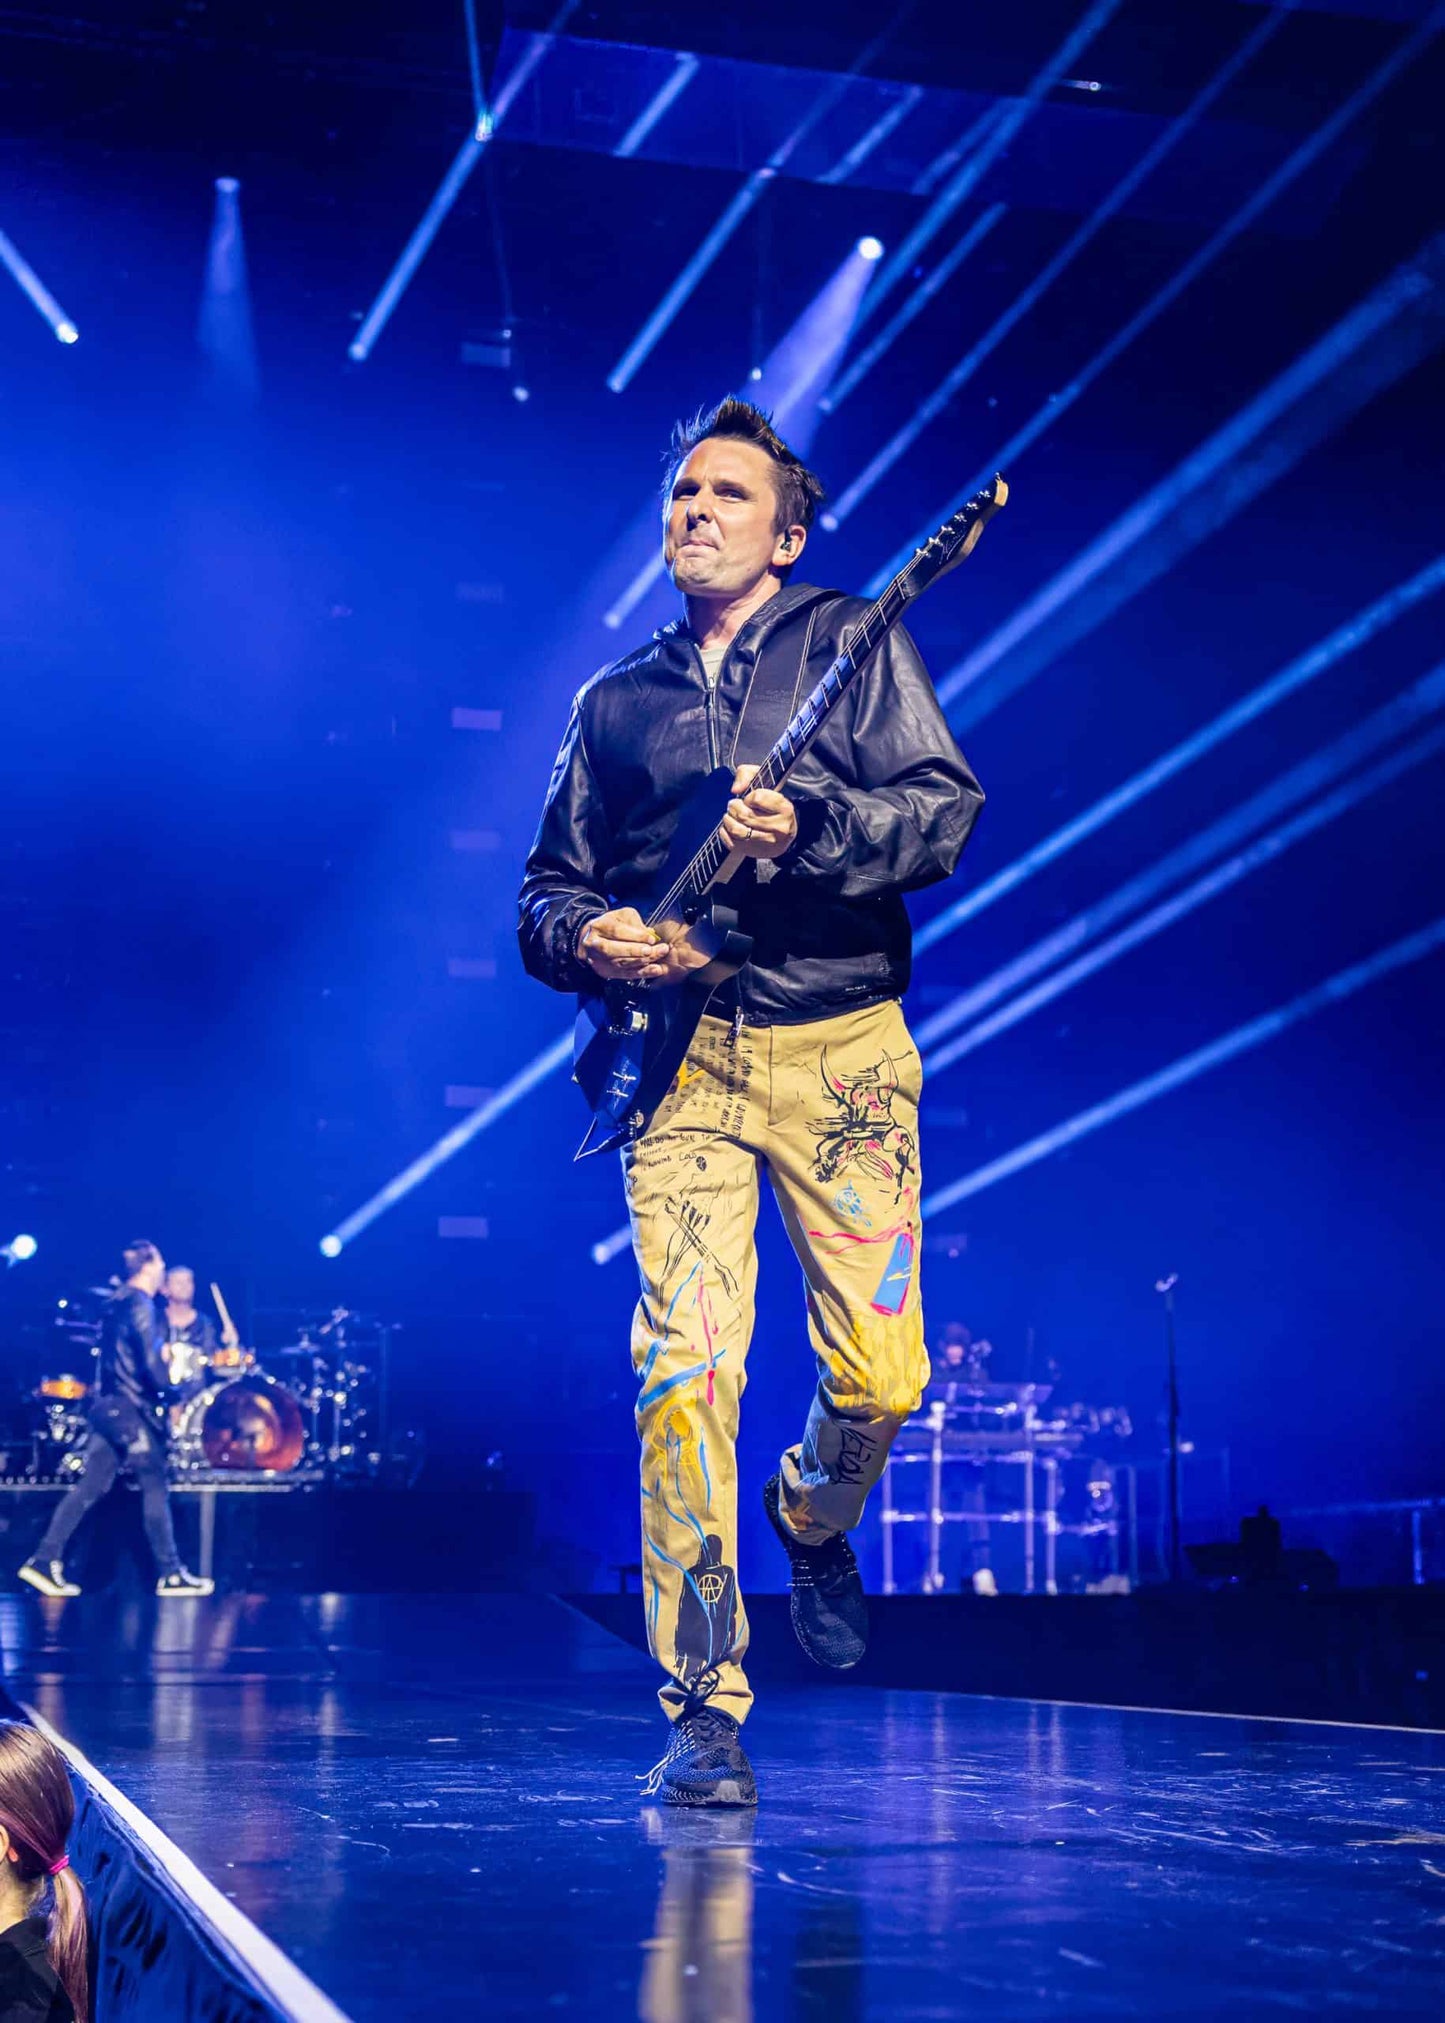 MUSE Will Of The People Pants Matthew Bellamy WOTP Trousers MUSE Live AO Arena Manchester 2023